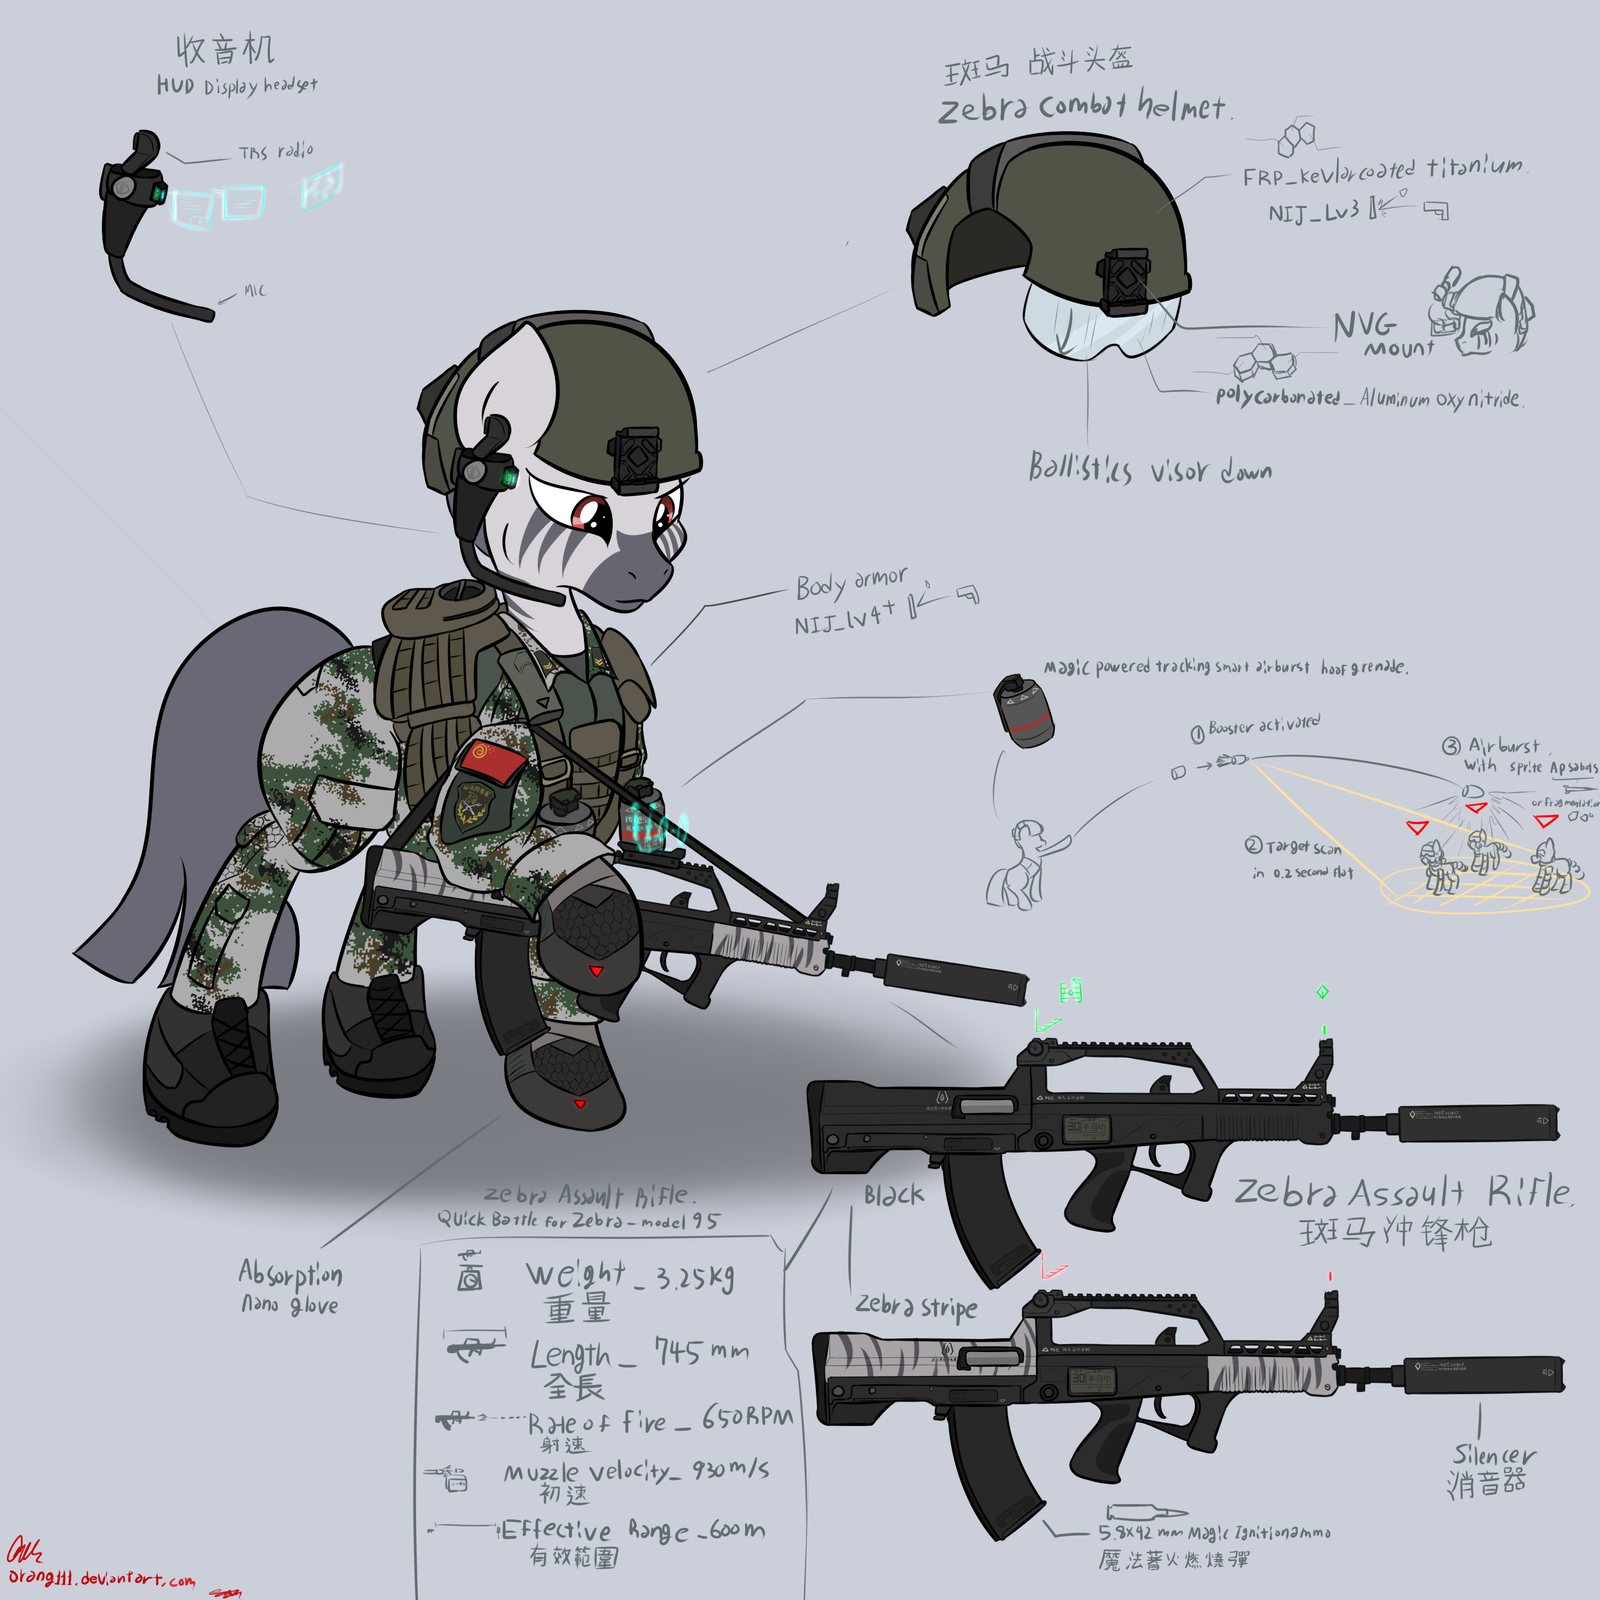 Ready for the task. - Weapon, My little pony, Original character, Special Agent, MLP Zebra